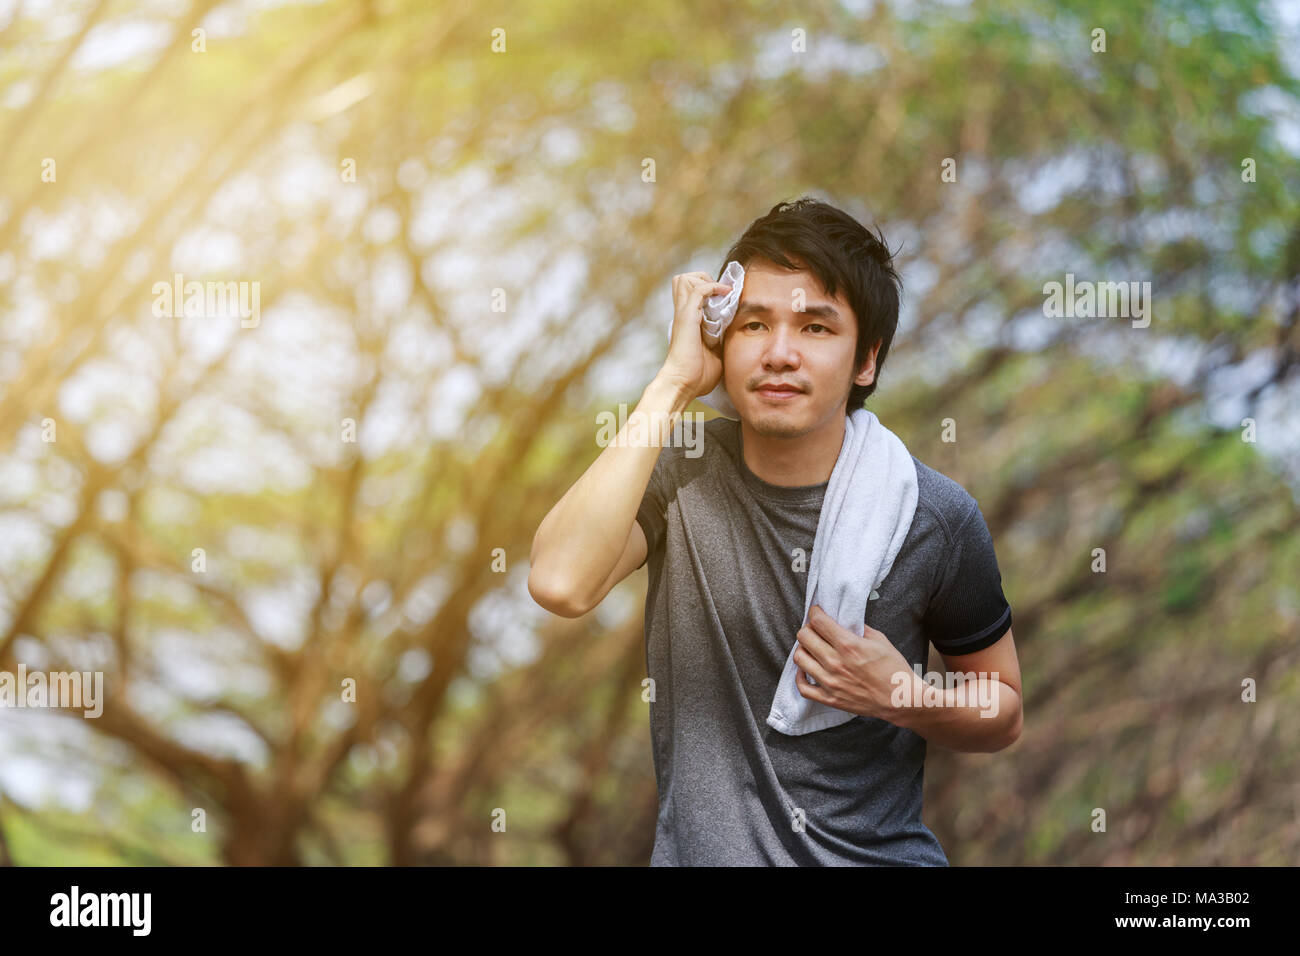 young sporty man running and wiping his sweat with a towel in the park Stock Photo